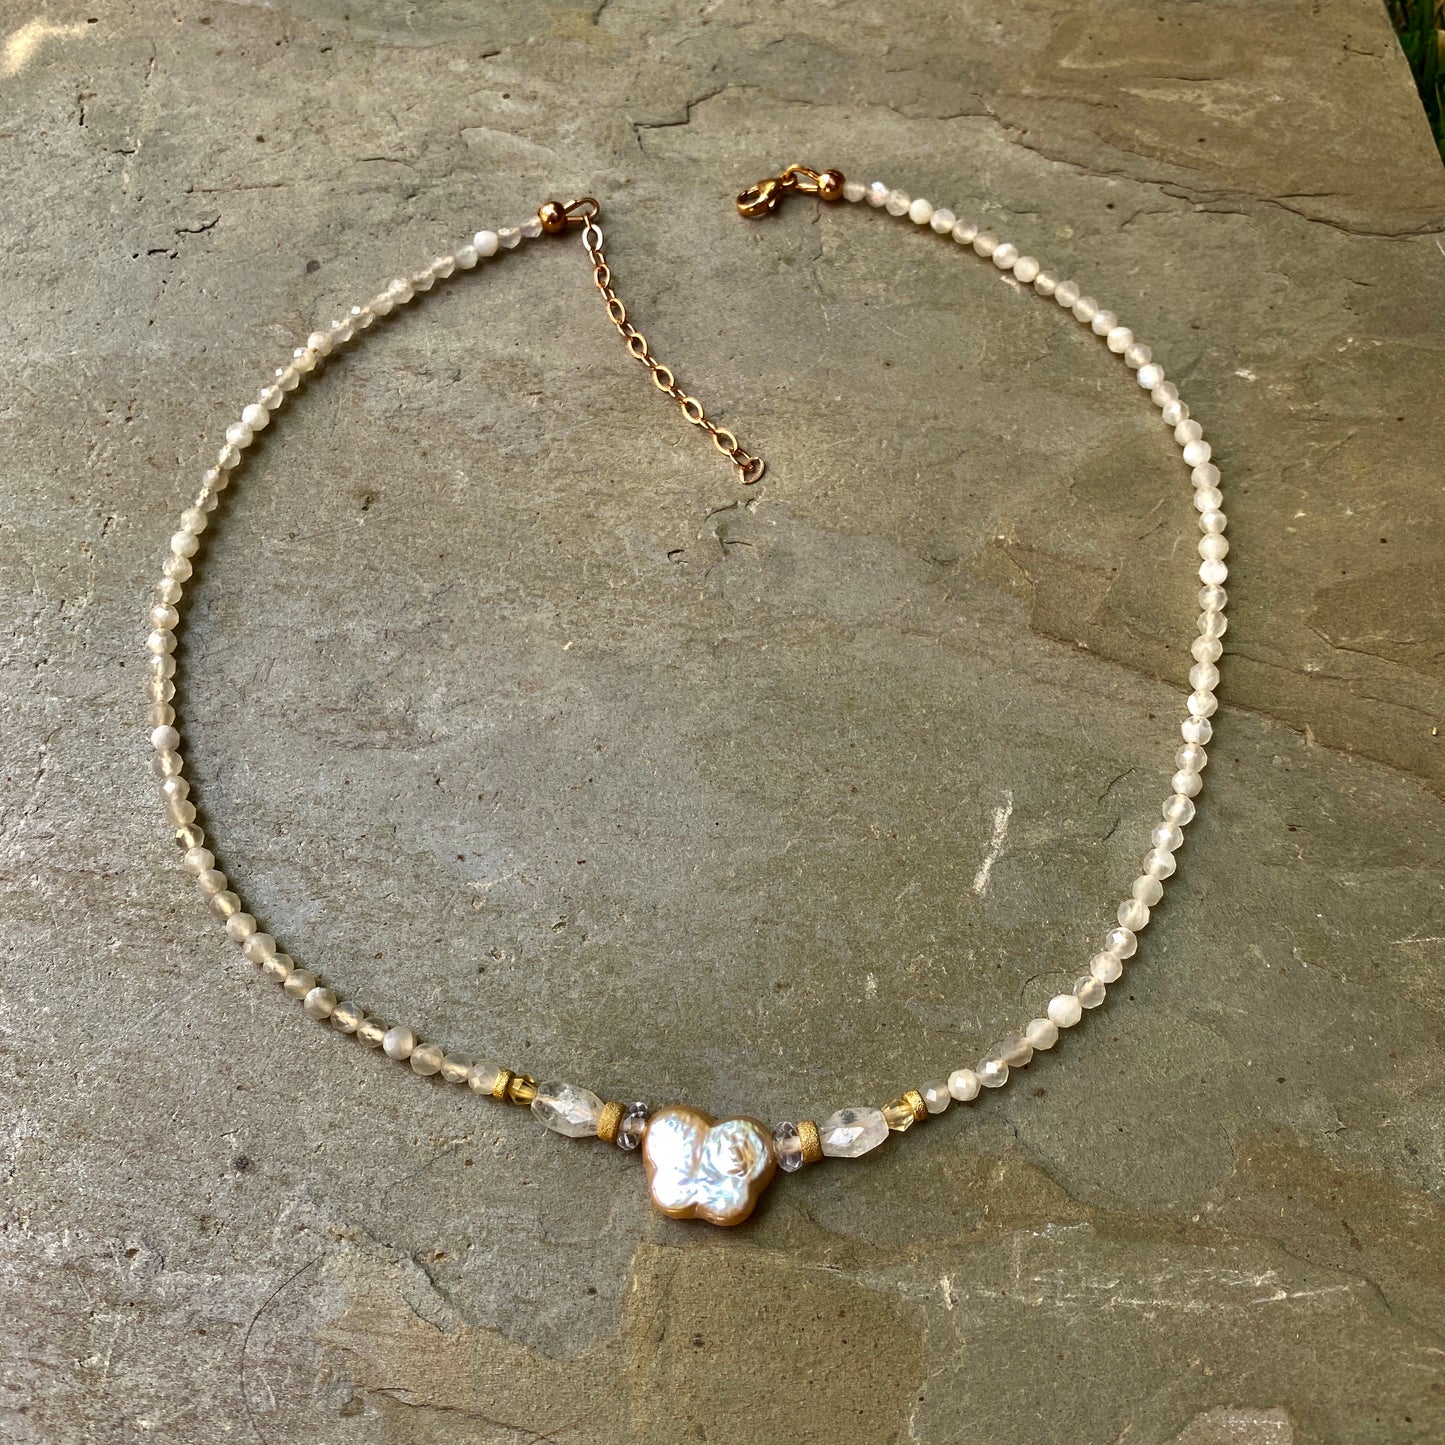 Pearl Butterfly W/ Moonstones and Citrine Gemstones and 14 Kt Gf Choker Necklace